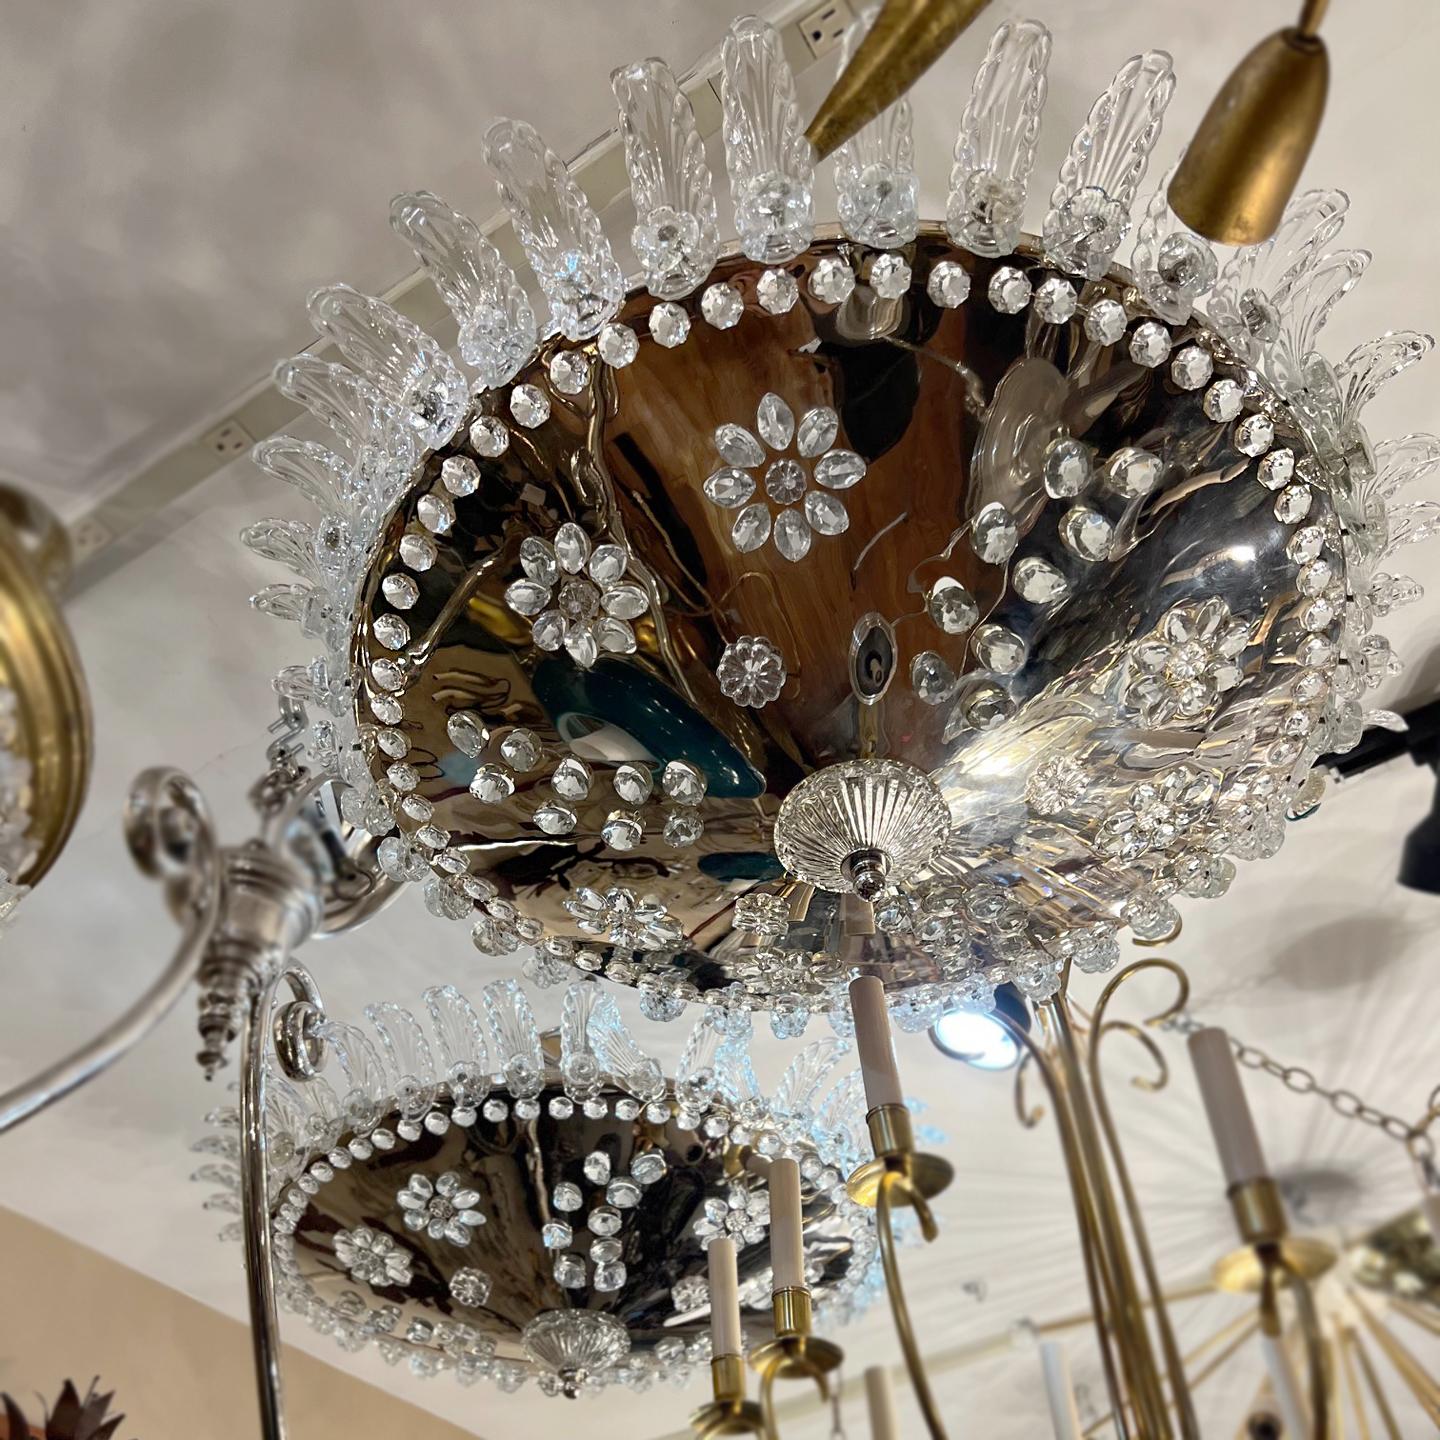 Pair of French circa 1940s silver plated light fixtures with 8 interior candelabra lights and pierced body with crystals rosettes. Each body is crowned with molded glass palmettes. Sold individually.

Measurements:
Height (drop): 16